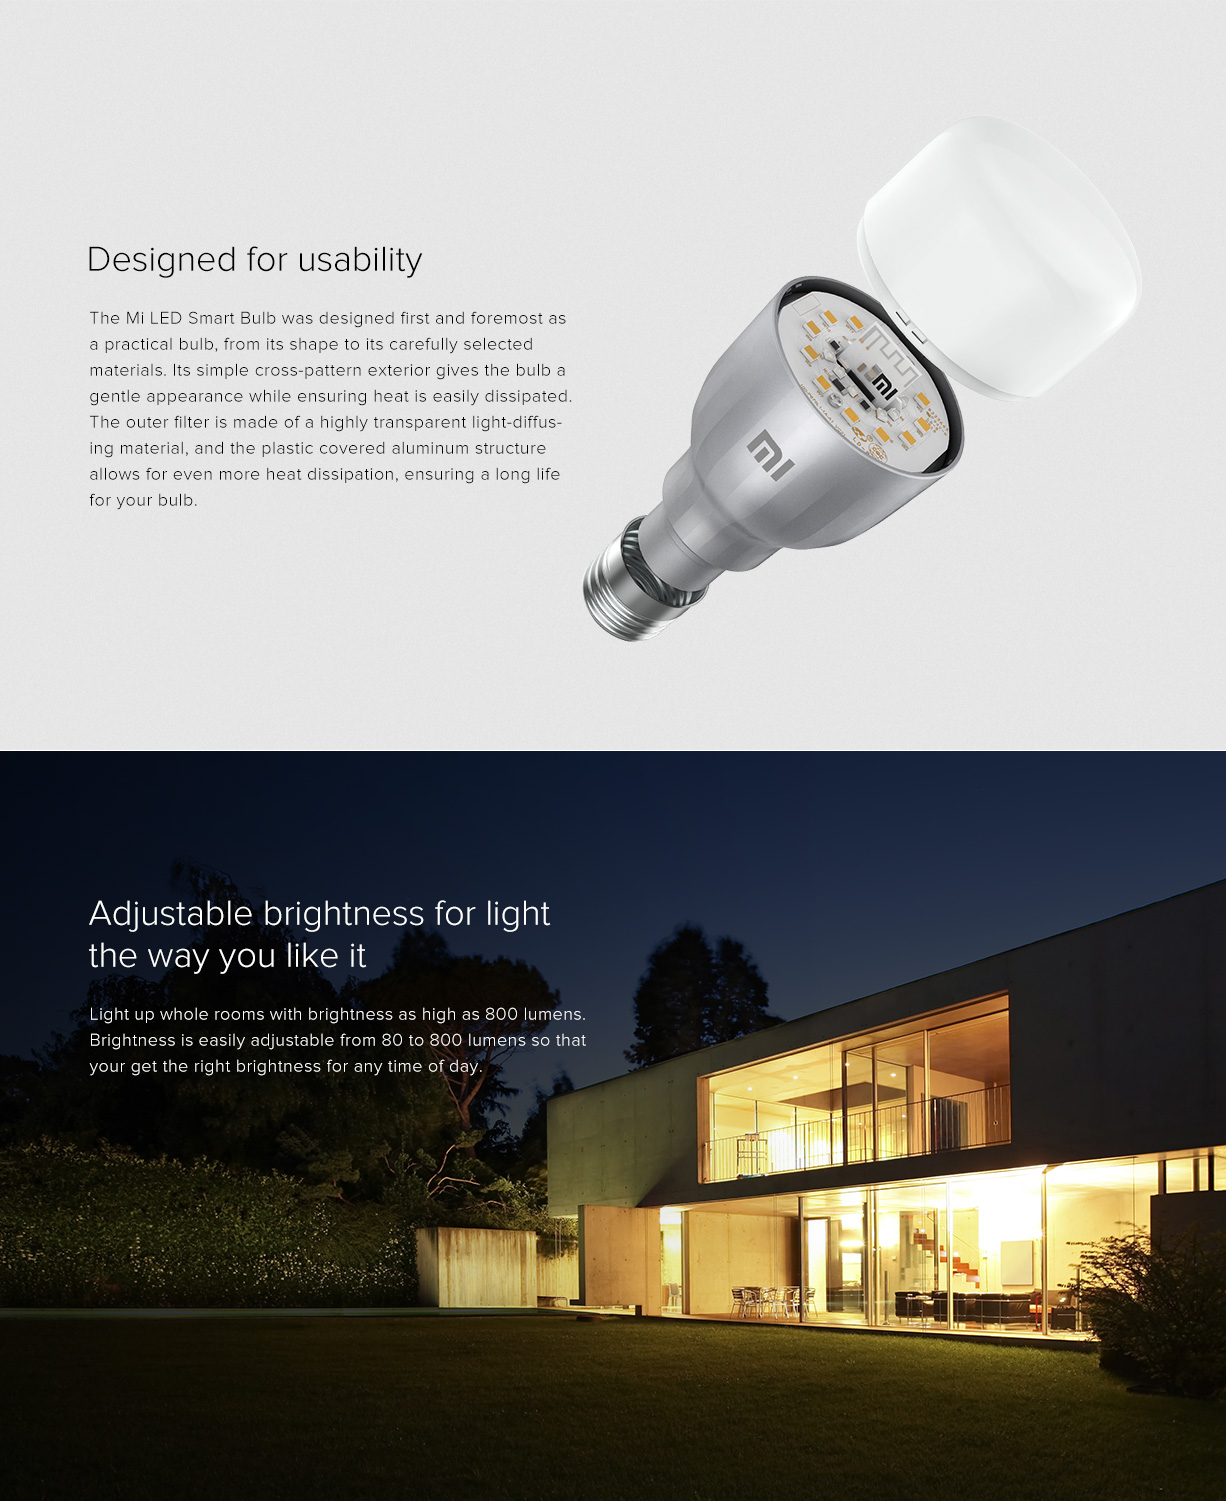 707C45C9 902E 13E4 A626 0C6E77A27163 Xiaomi Xiaomi Mi Smart Led Bulb Essential(White And Color) Wifi Remote Control Smart Light Work With Alexa And Google Assistant, Voice Control, Wifi Connection, Adjustable Color Temperature, Scheduled On/Off, Smart App Control Xiaomi Mi Led Xiaomi Mi Led Smart Bulb Essential Bulb (White And Color)(10W)